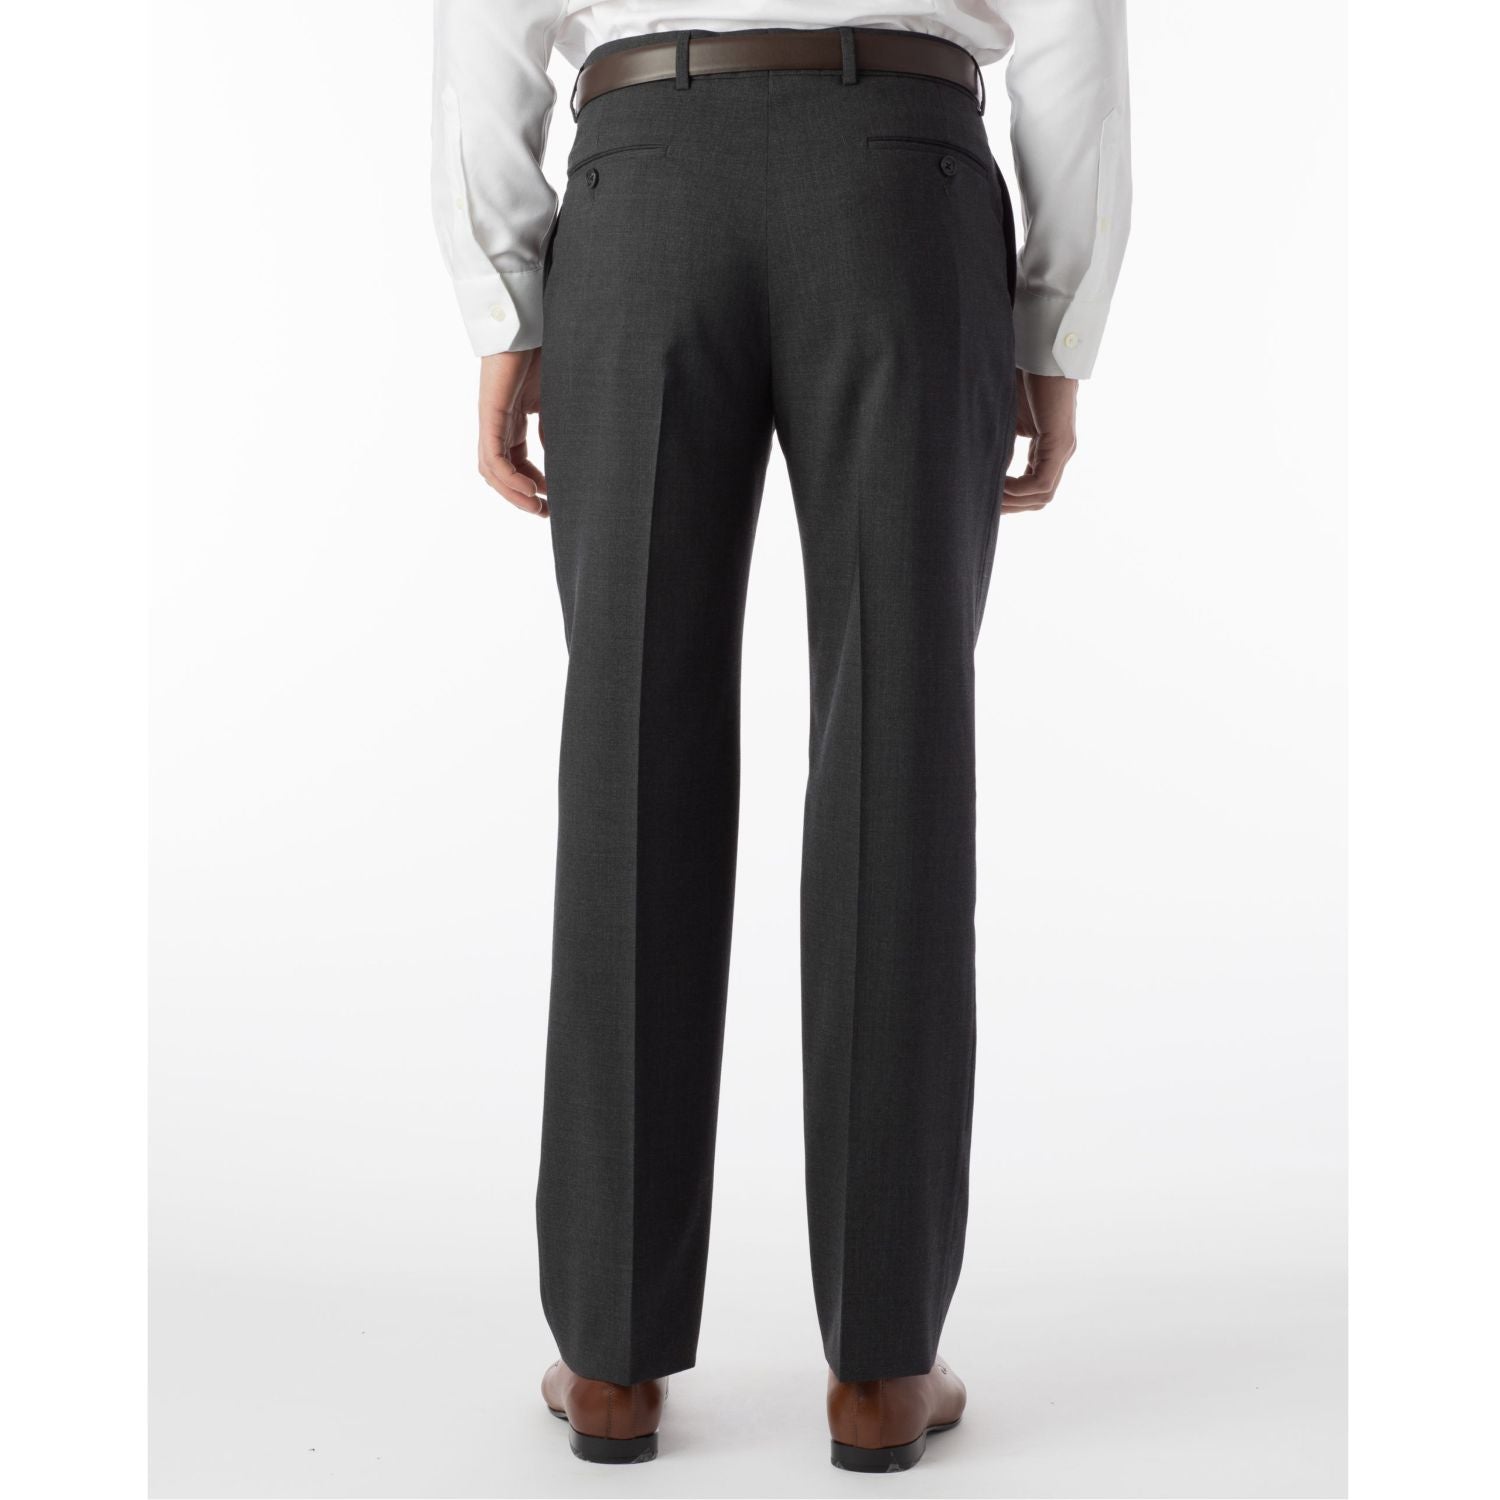 Super 120s Wool Travel Twill Comfort-EZE Trouser in Charcoal Grey (Flat Front Models) by Ballin